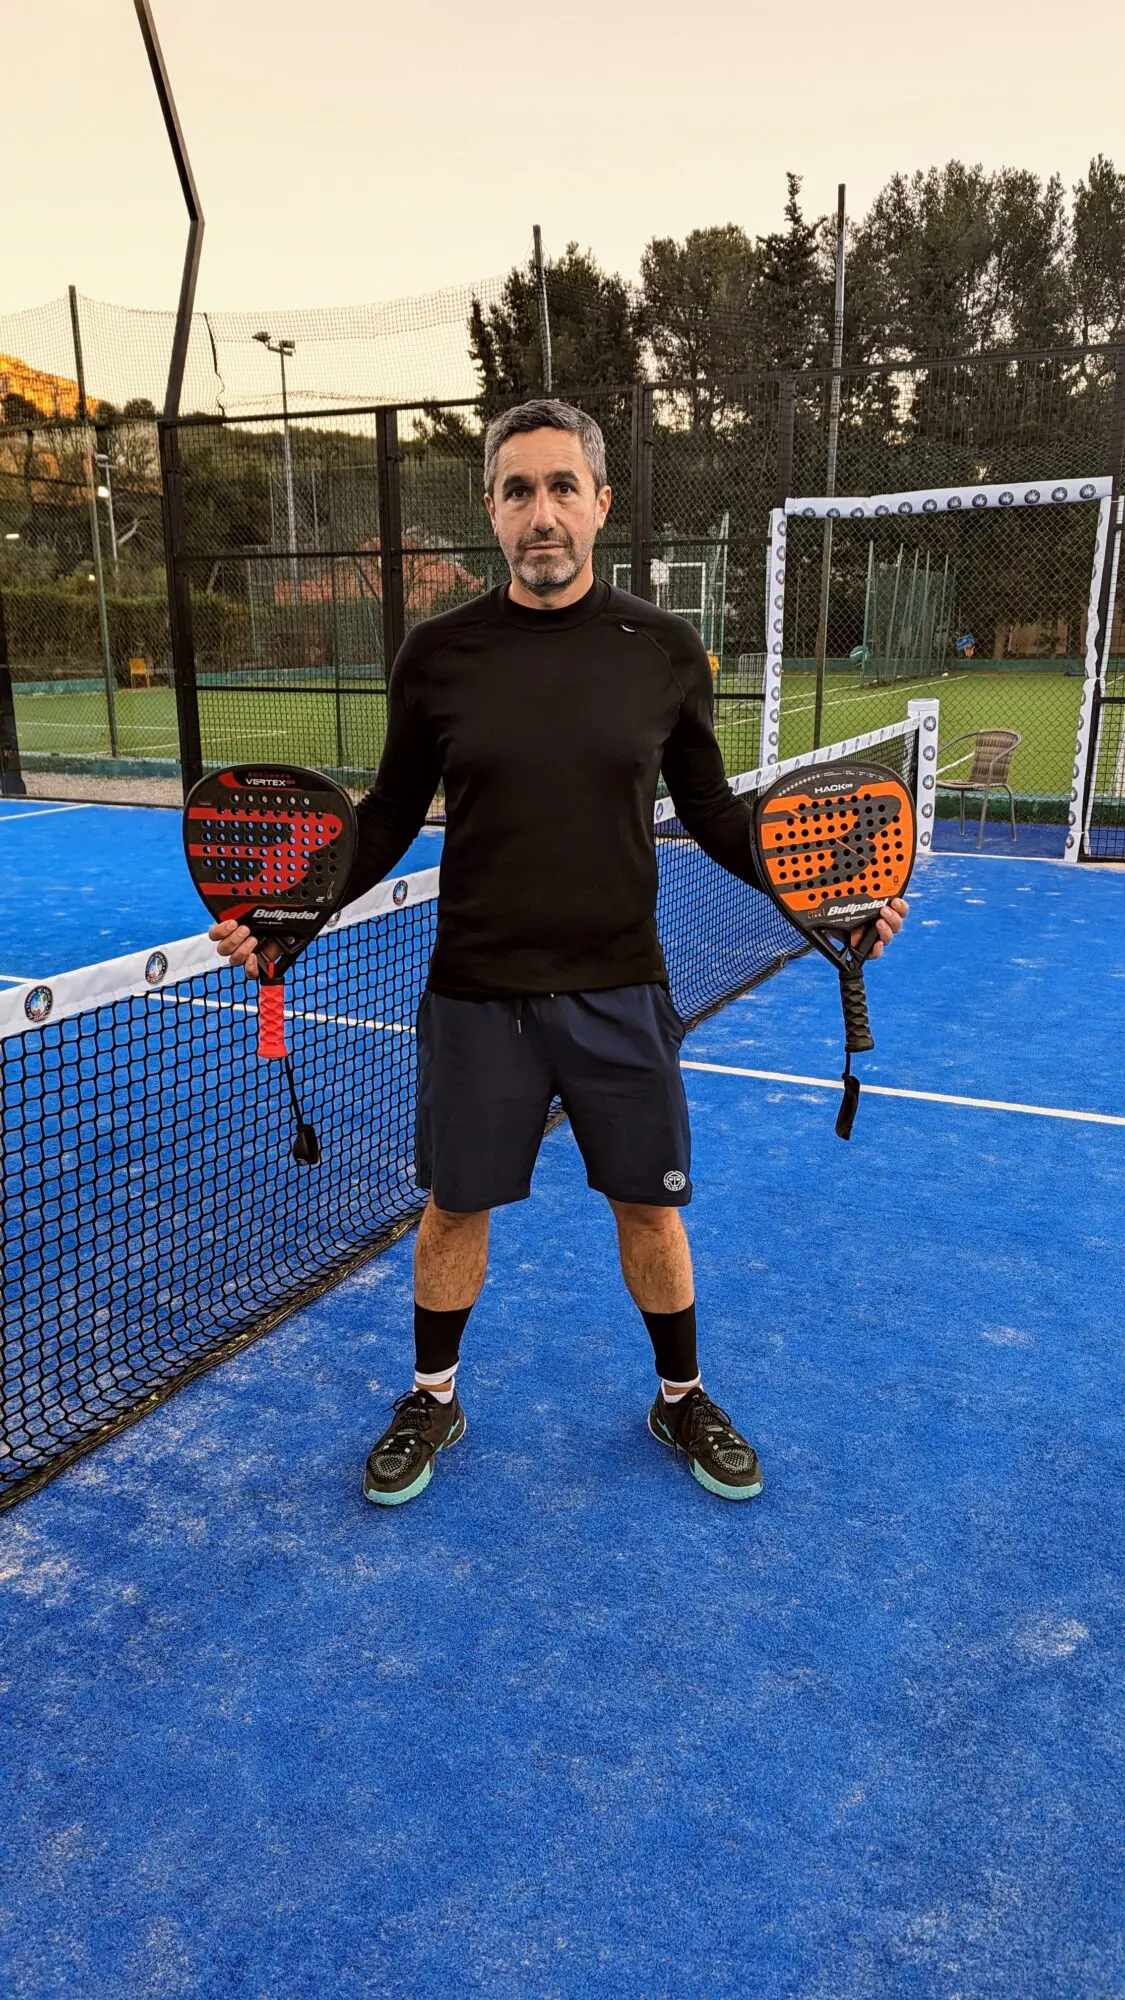 Stéphane Penso tests the Bullpadel Hack 03 and Vertex 03